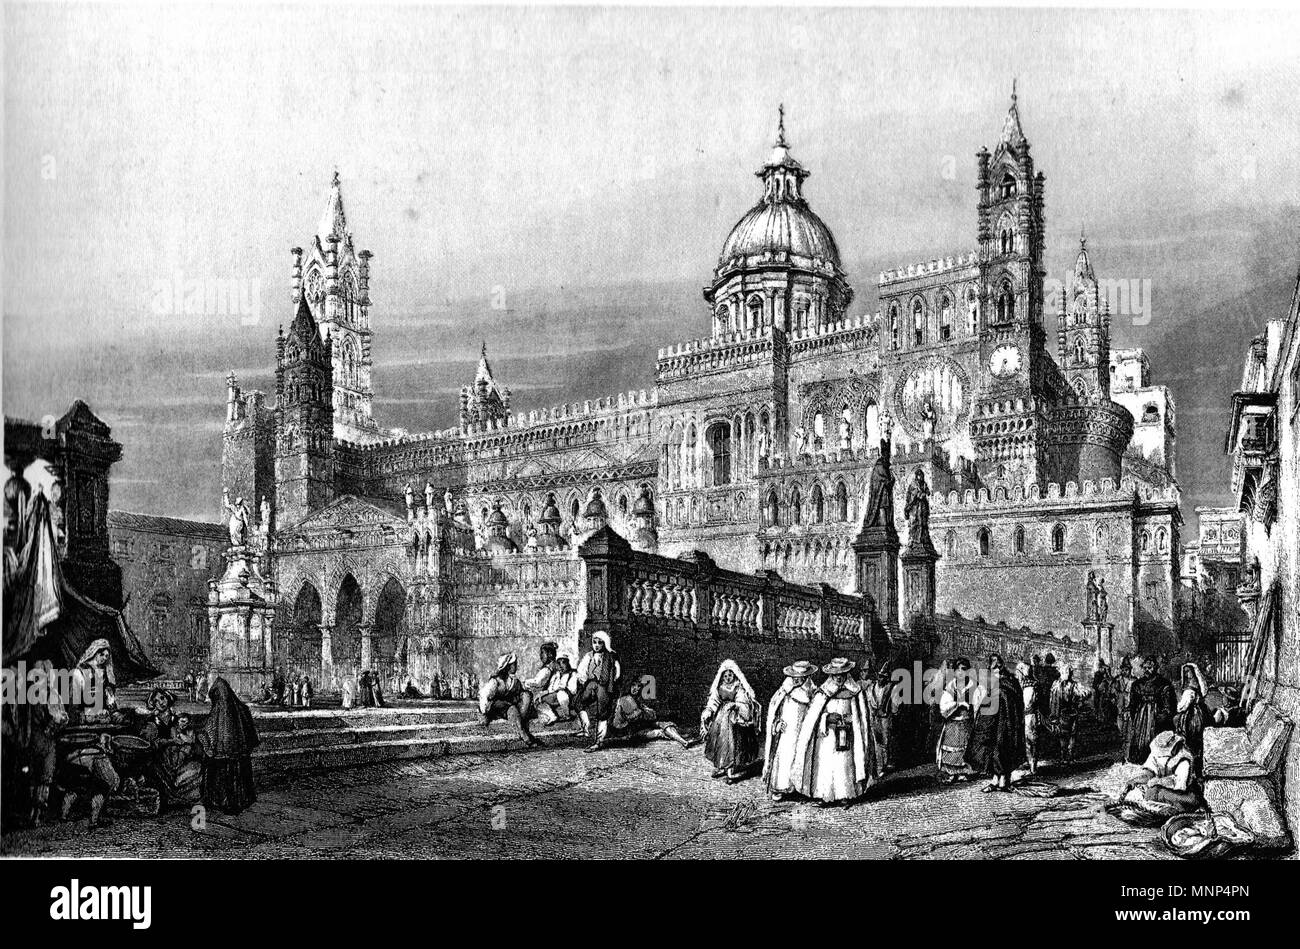 . Palermo cathedral around 1840. Drawing by W.L. Leitch, engraving by J.H. Le Keux. circa 1840.    John Henry Le Keux  (1812–1896)    Description English engraver son of John Le Keux nephew of Henry Le Keux  Date of birth/death 23 March 1812 4 February 1896  Location of birth/death London Durham  Authority control  : Q18164165 VIAF: 39256504 ISNI: 0000 0000 6705 9999 ULAN: 500049421 LCCN: nr94003156 GND: 1037876199 WorldCat      After William Leighton Leitch  (1804–1883)     Alternative names W.L. Leitch  Description Scottish painter  Date of birth/death 22 November 1804 25 April 1883  Locatio Stock Photo